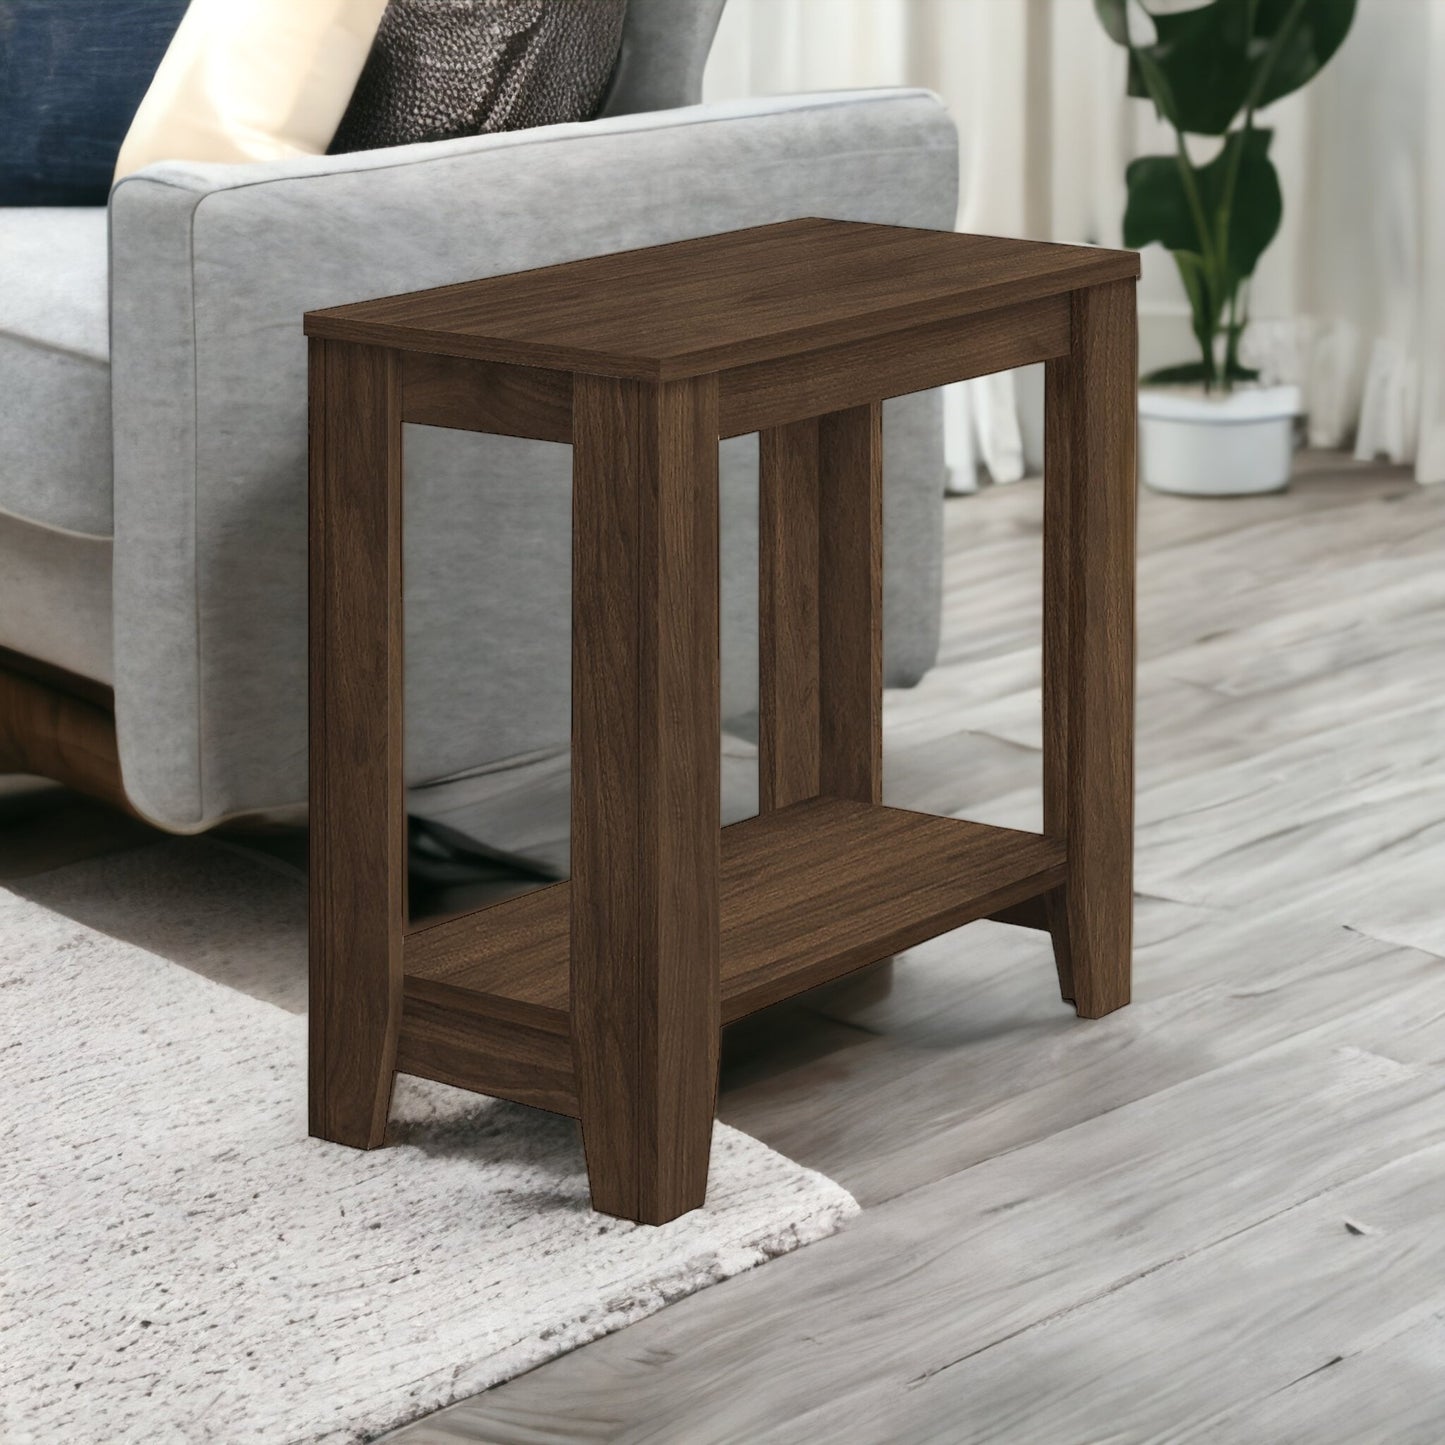 22" Walnut End Table With Shelf By Homeroots